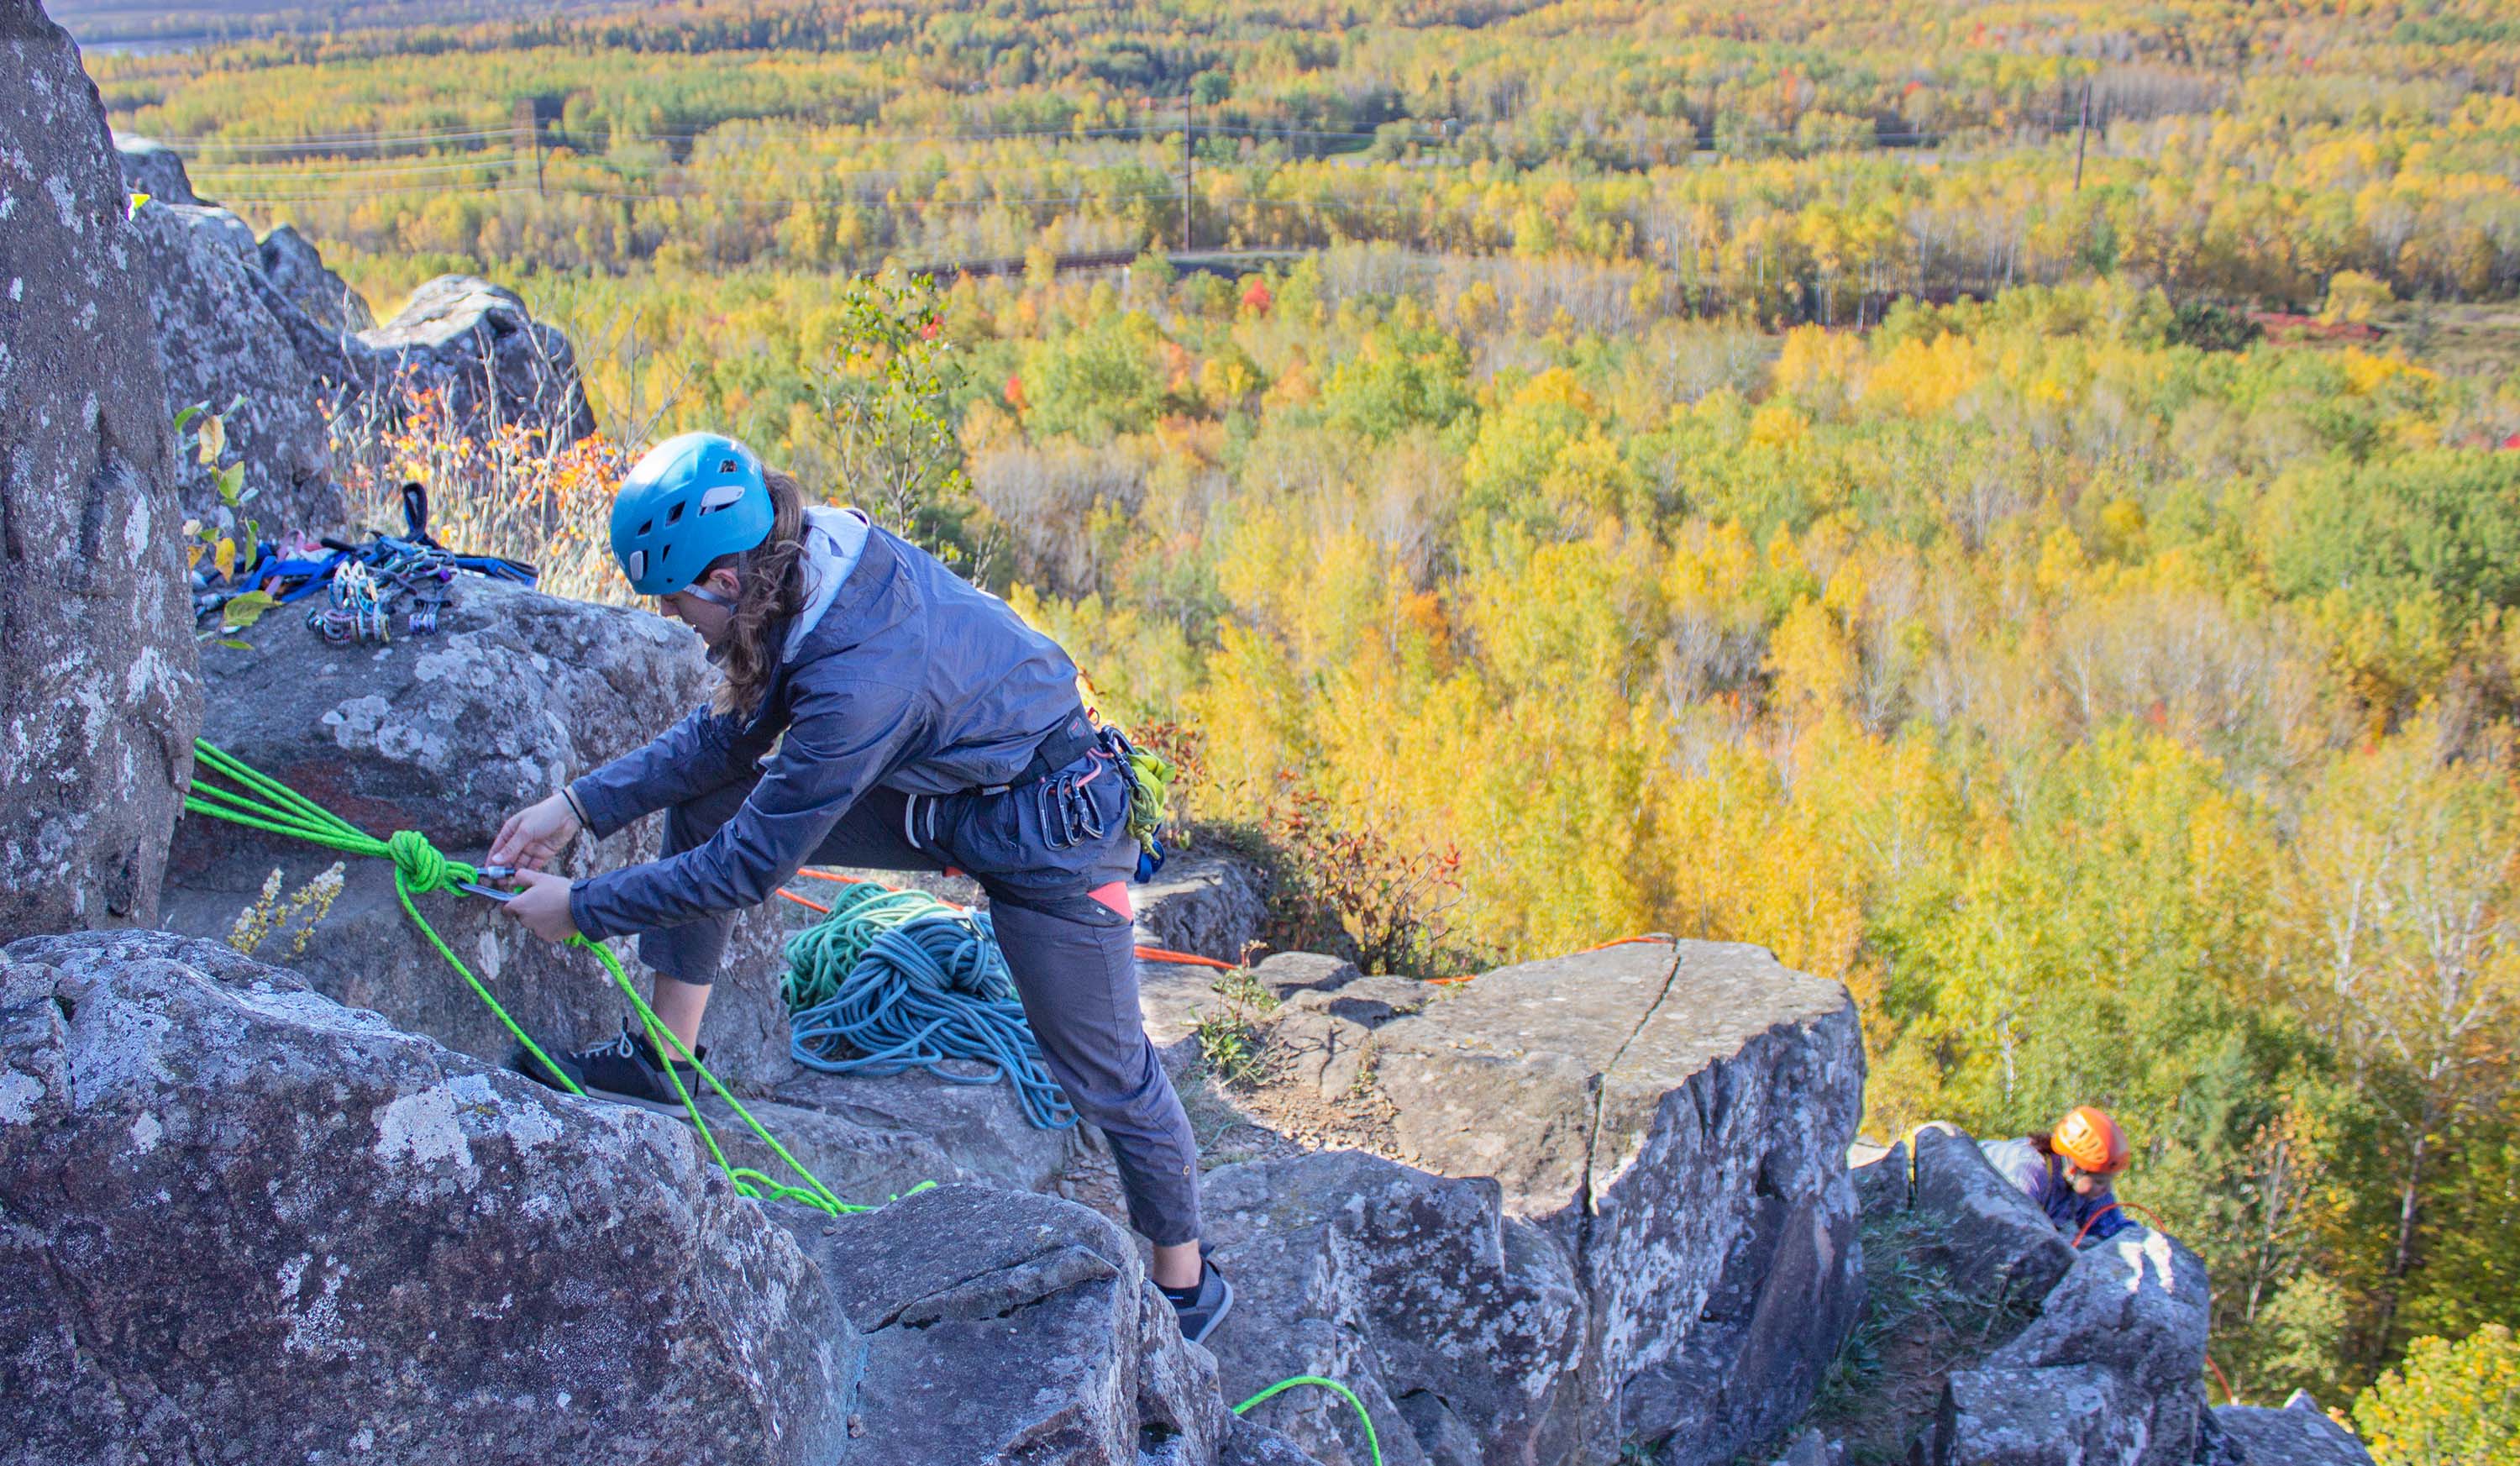 climbers seting up a toprope belay at ely's Peak